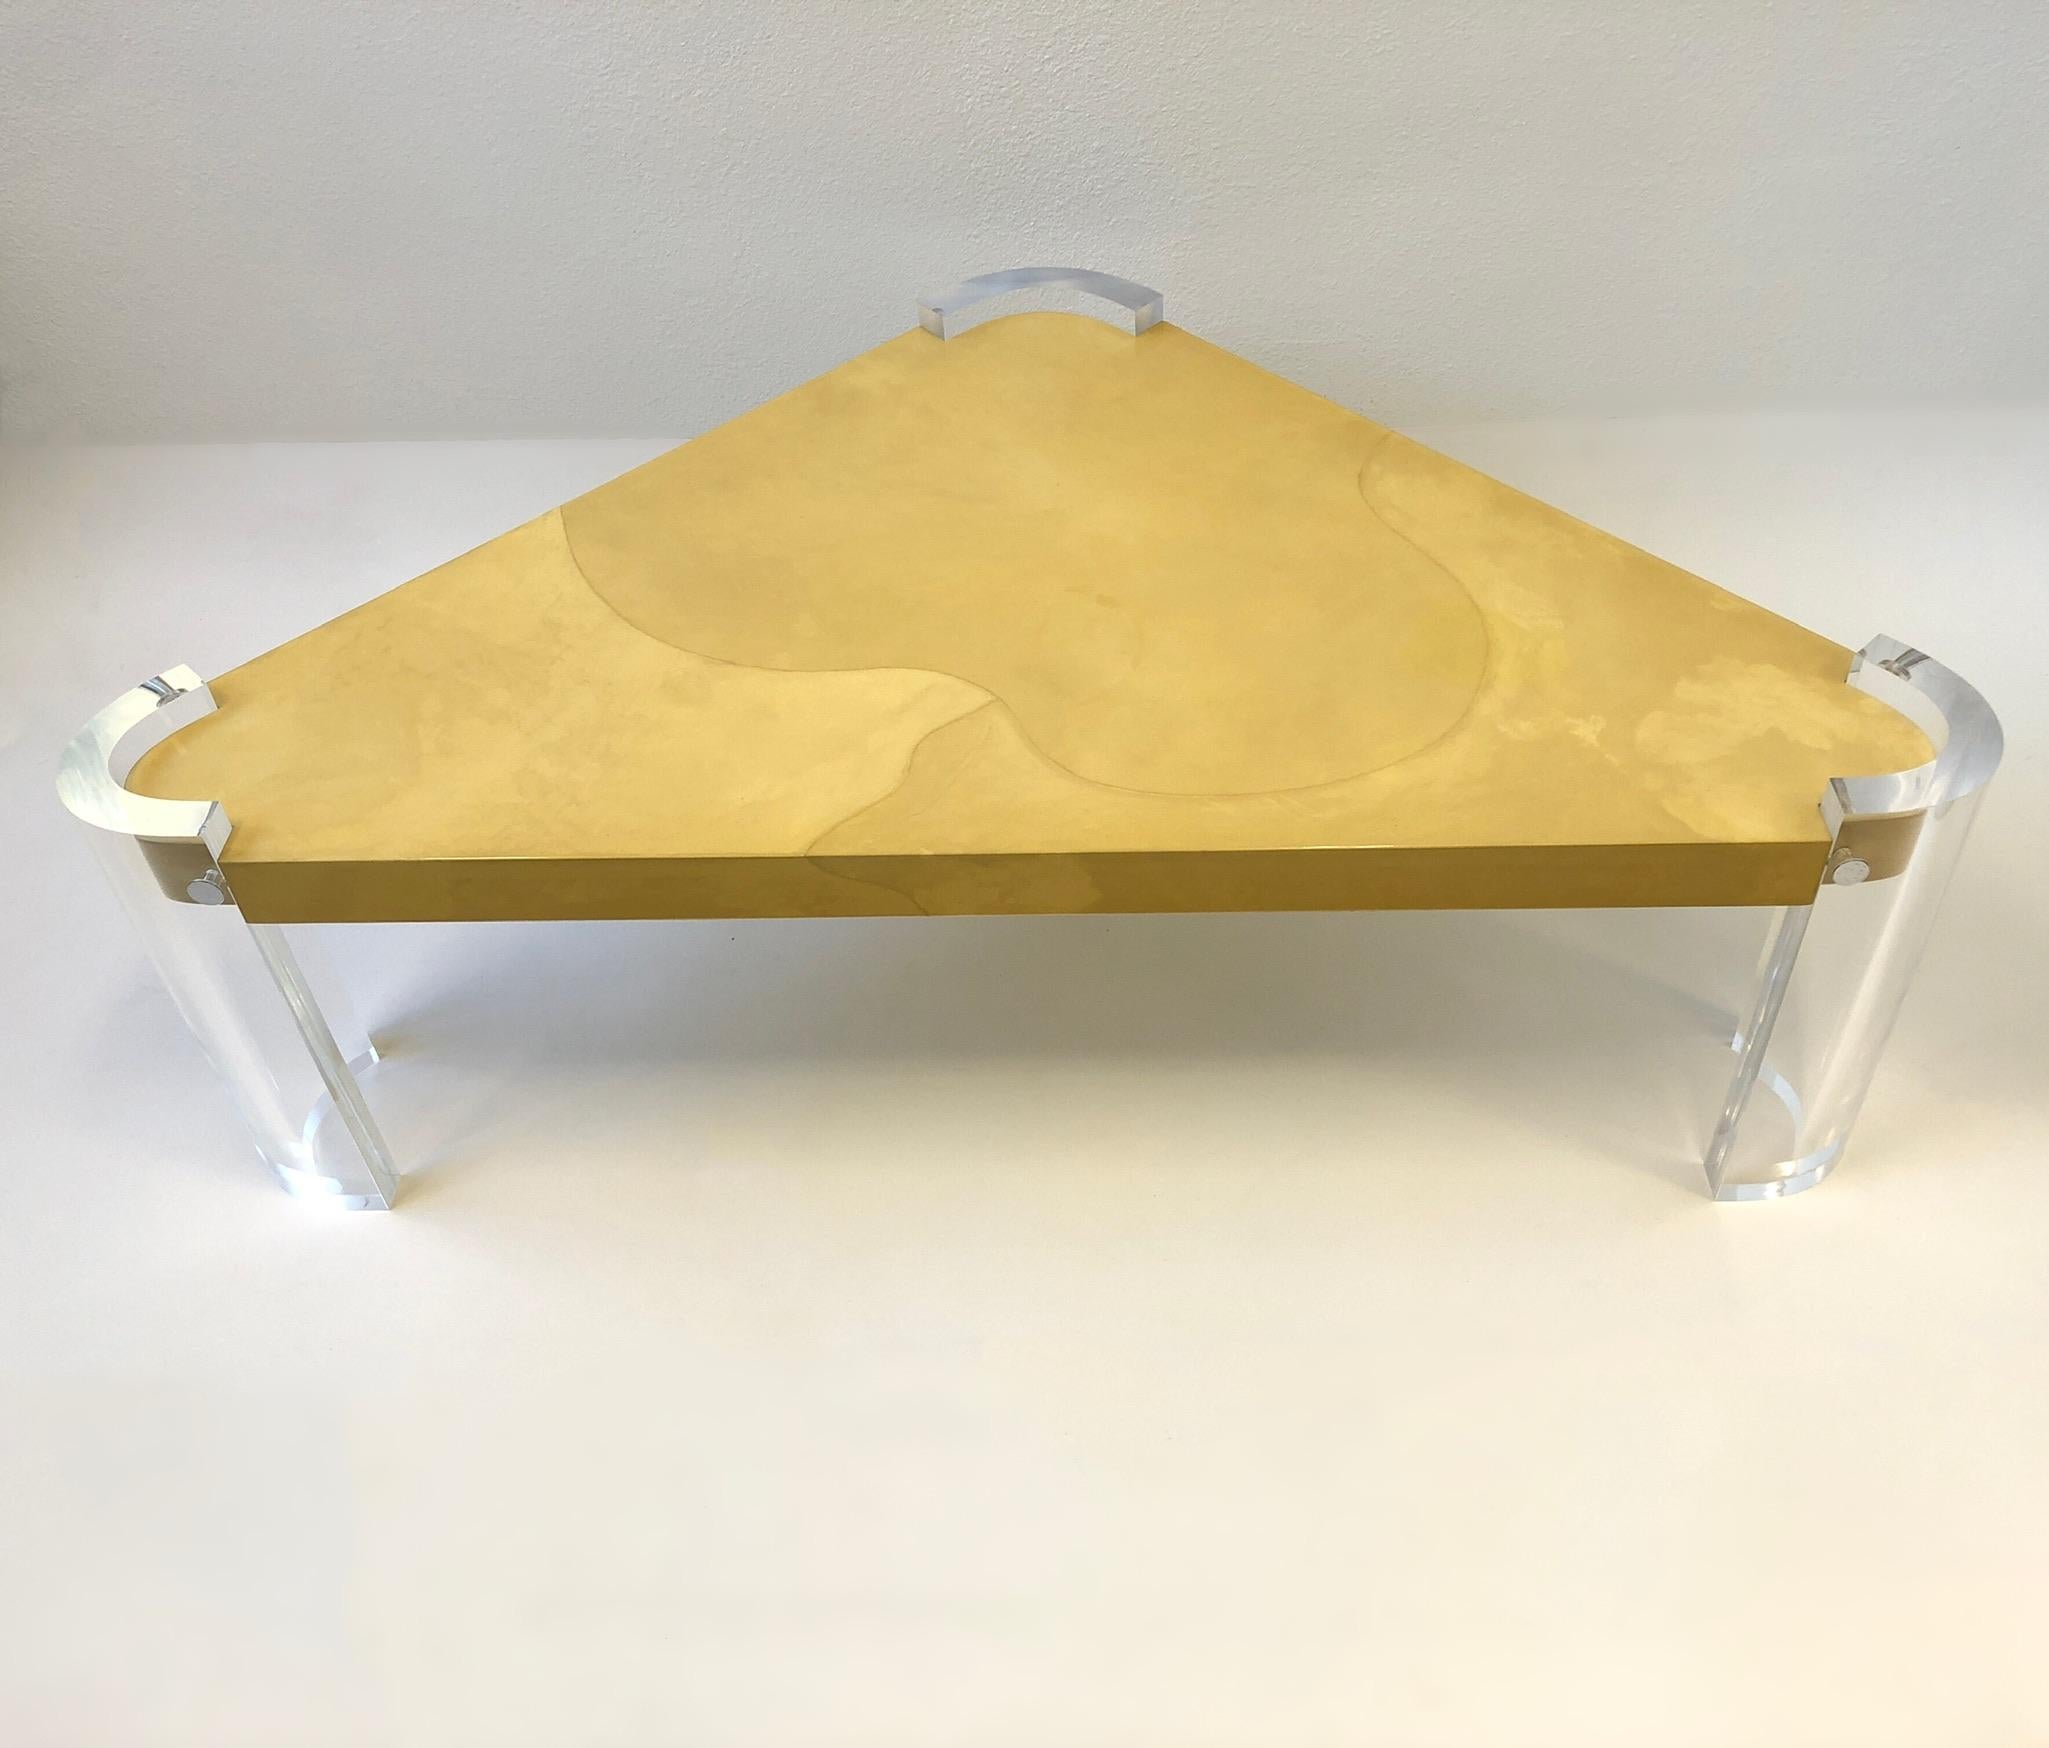 Spectacular 1980’s clear lucite and lacquered goatskin, triangular shaped cocktail table in the manner of Karl Springer.
In beautiful condition. Lucite leg have been newly professionally polished. 
Measurements: two sides are 42” wide, one side is